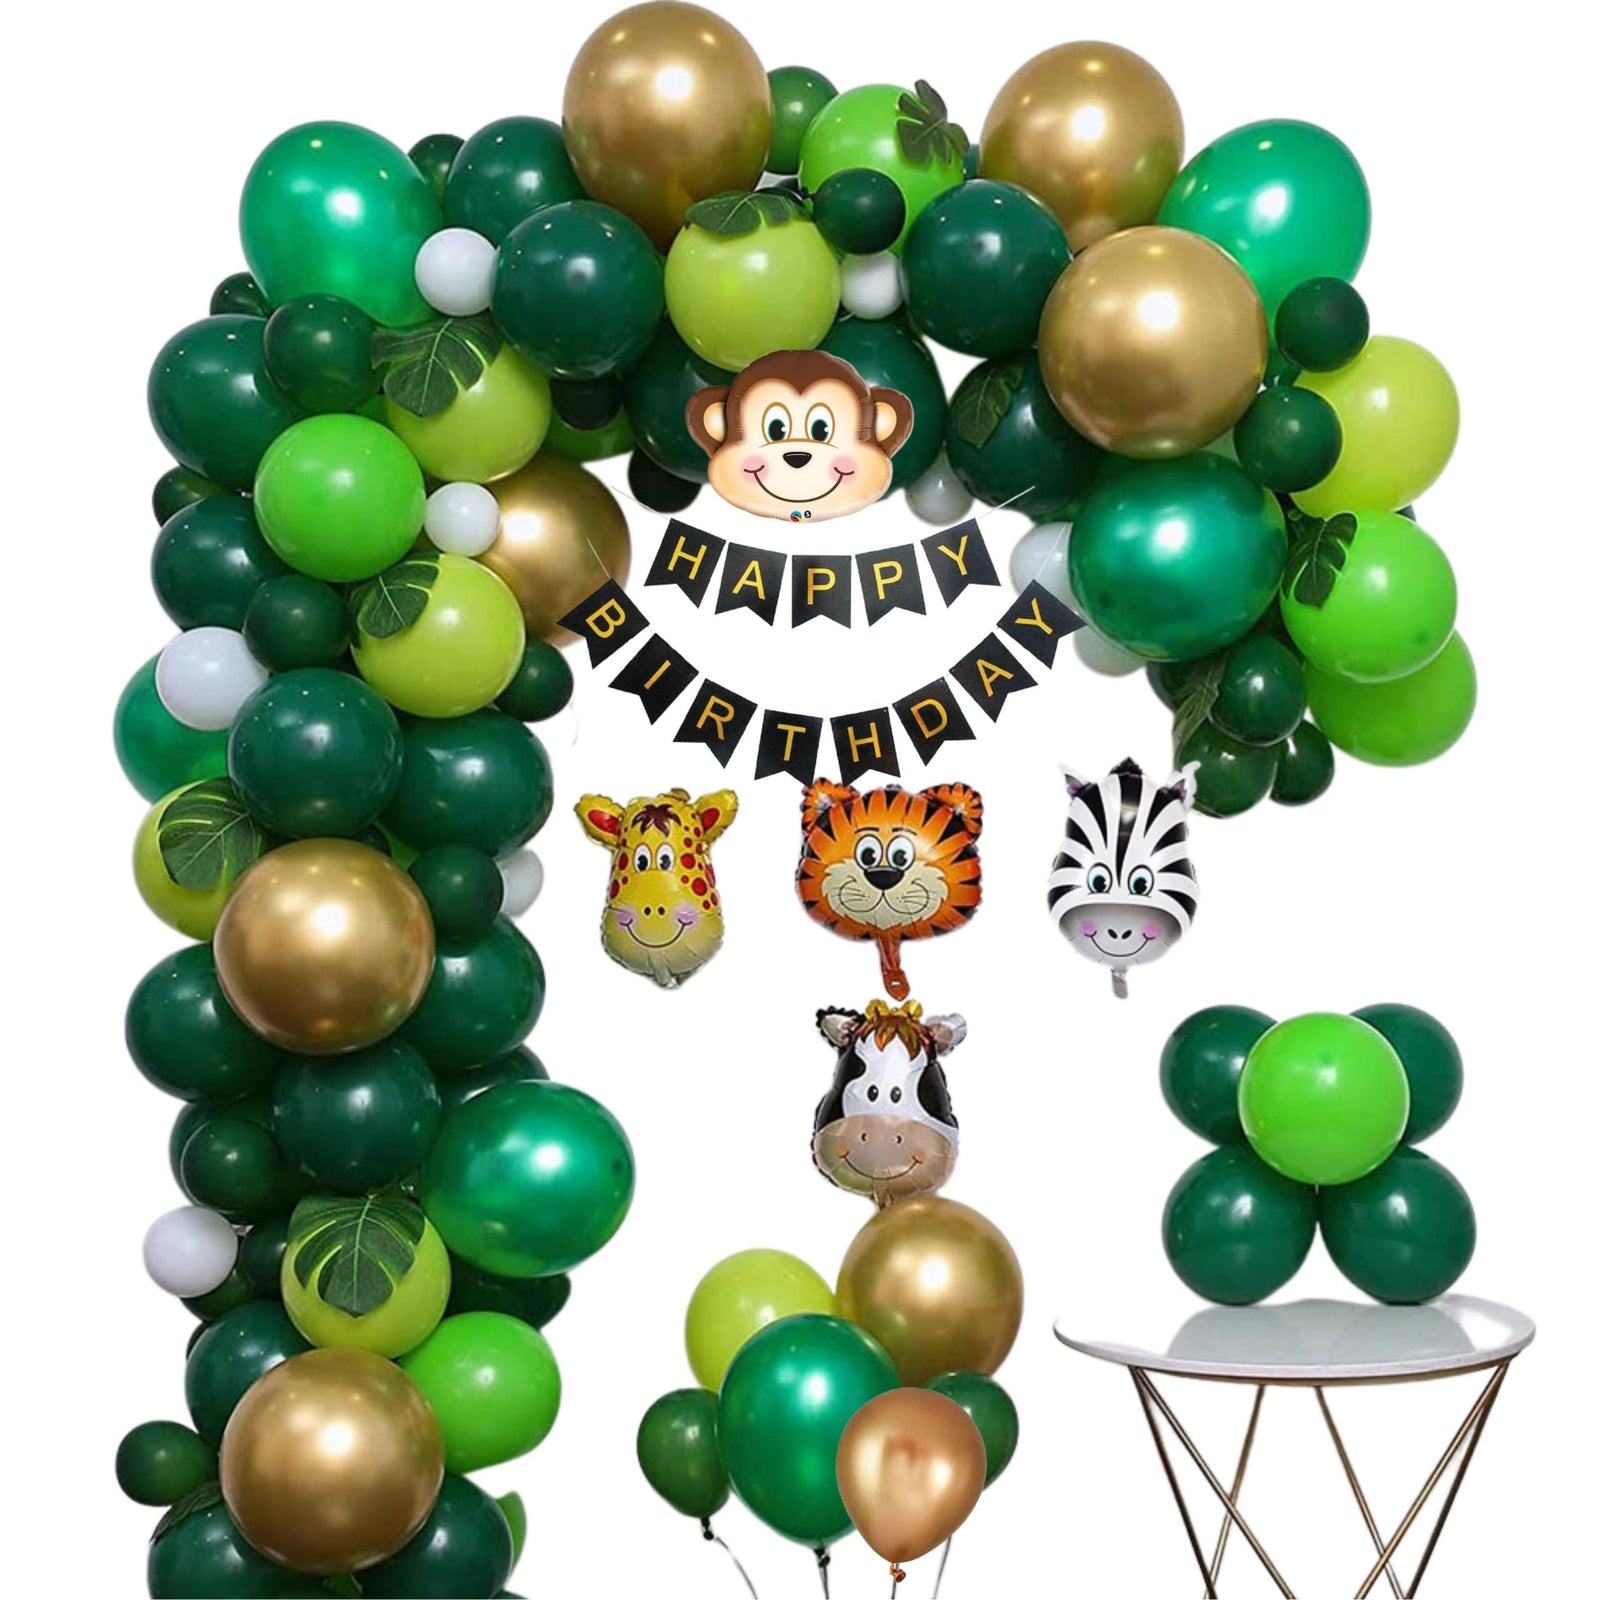 Mickey Mouse Theme Birthday Party Decoration Ideas for your 1st or Half Birthday  Party